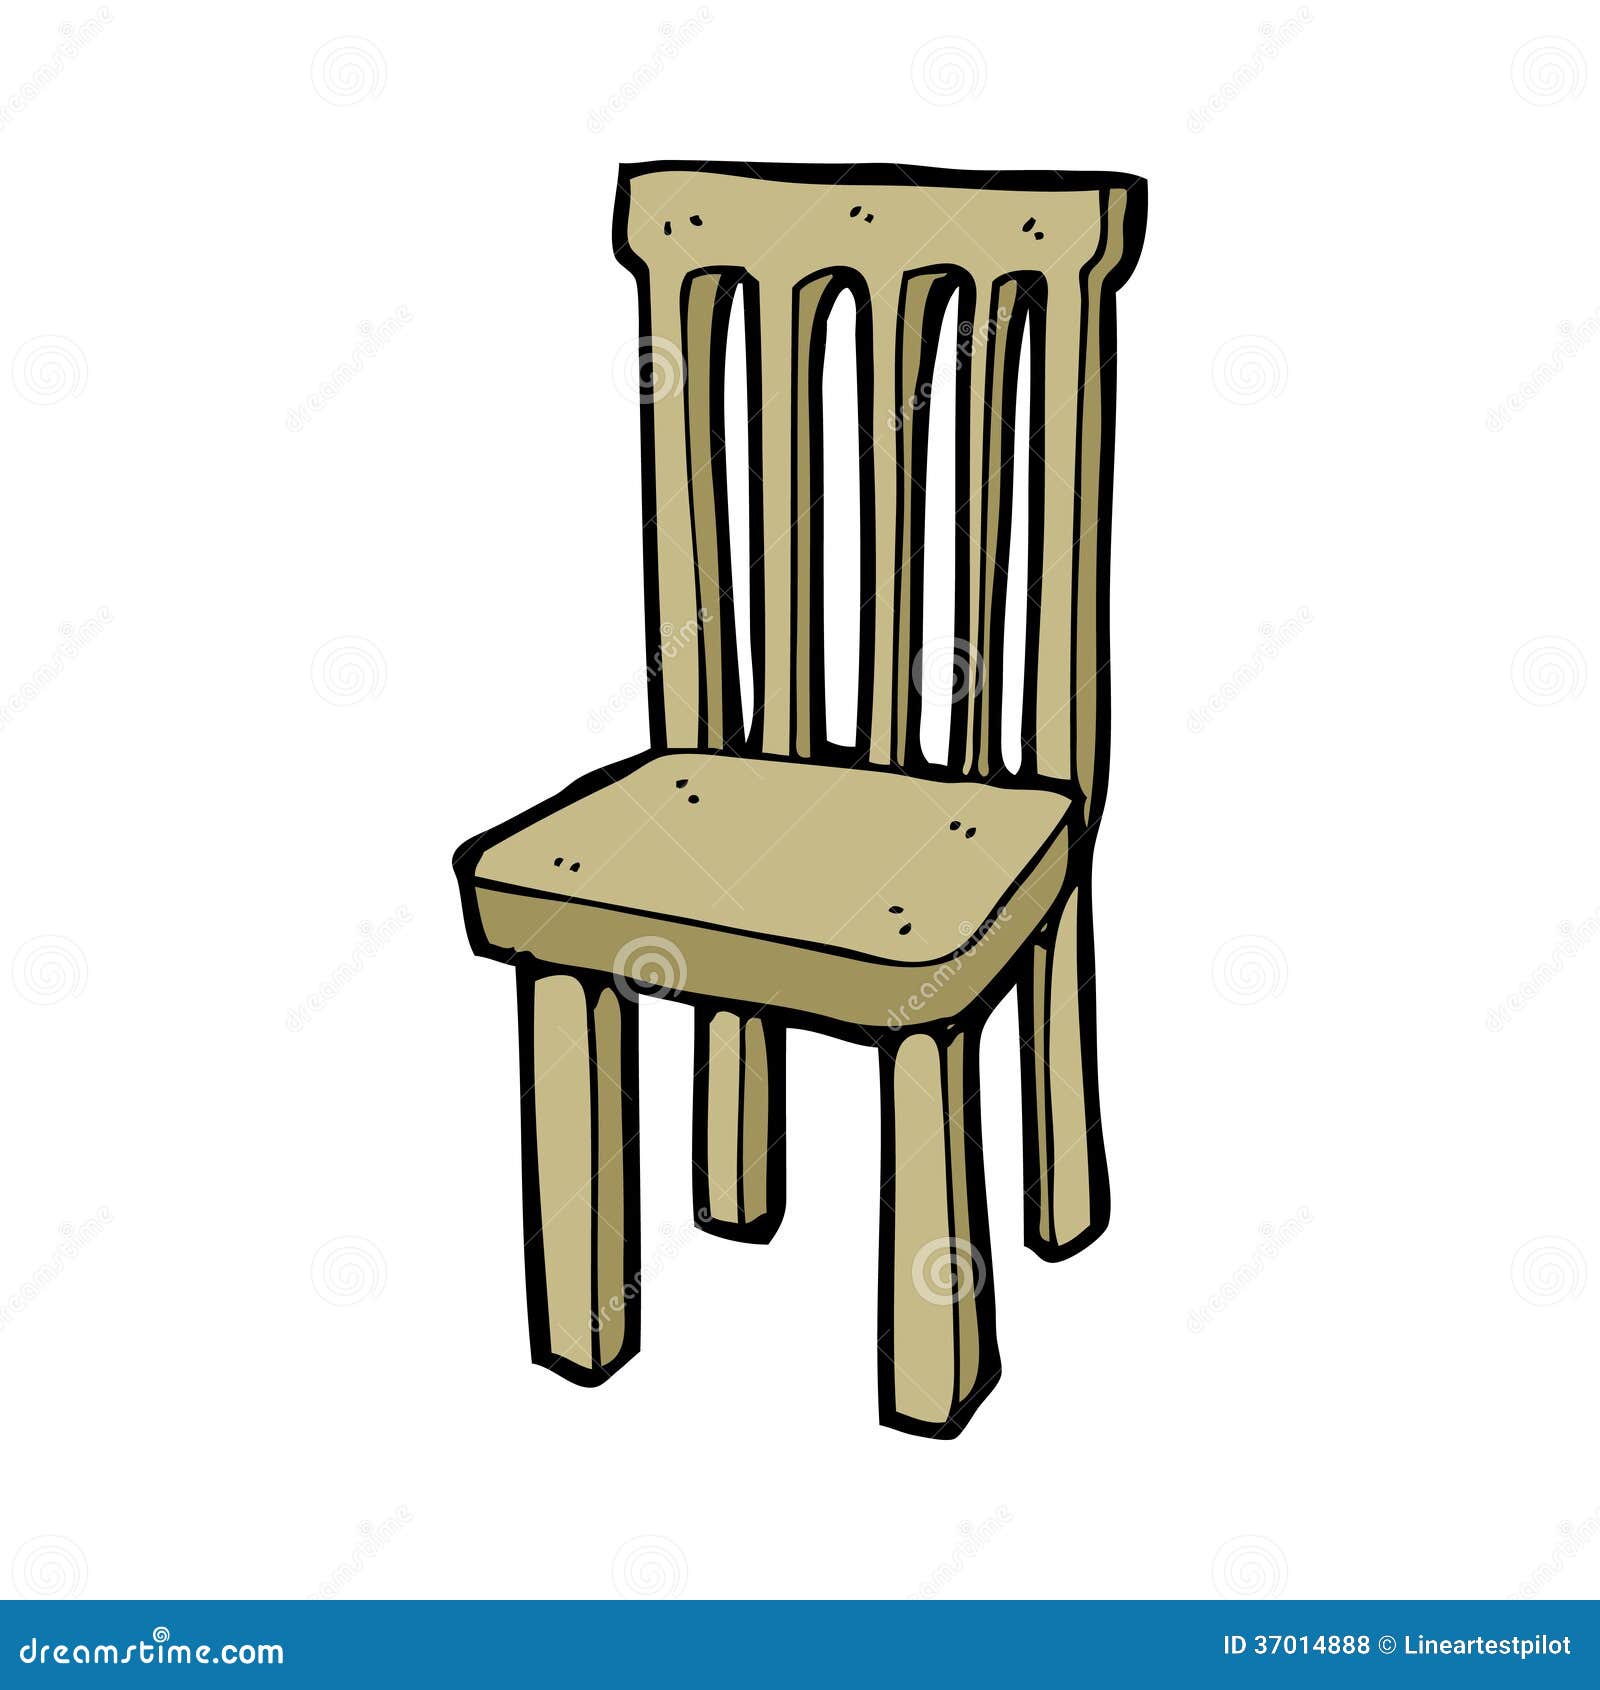 cartoon wooden chair hand drawn illustration retro style vector available 37014888